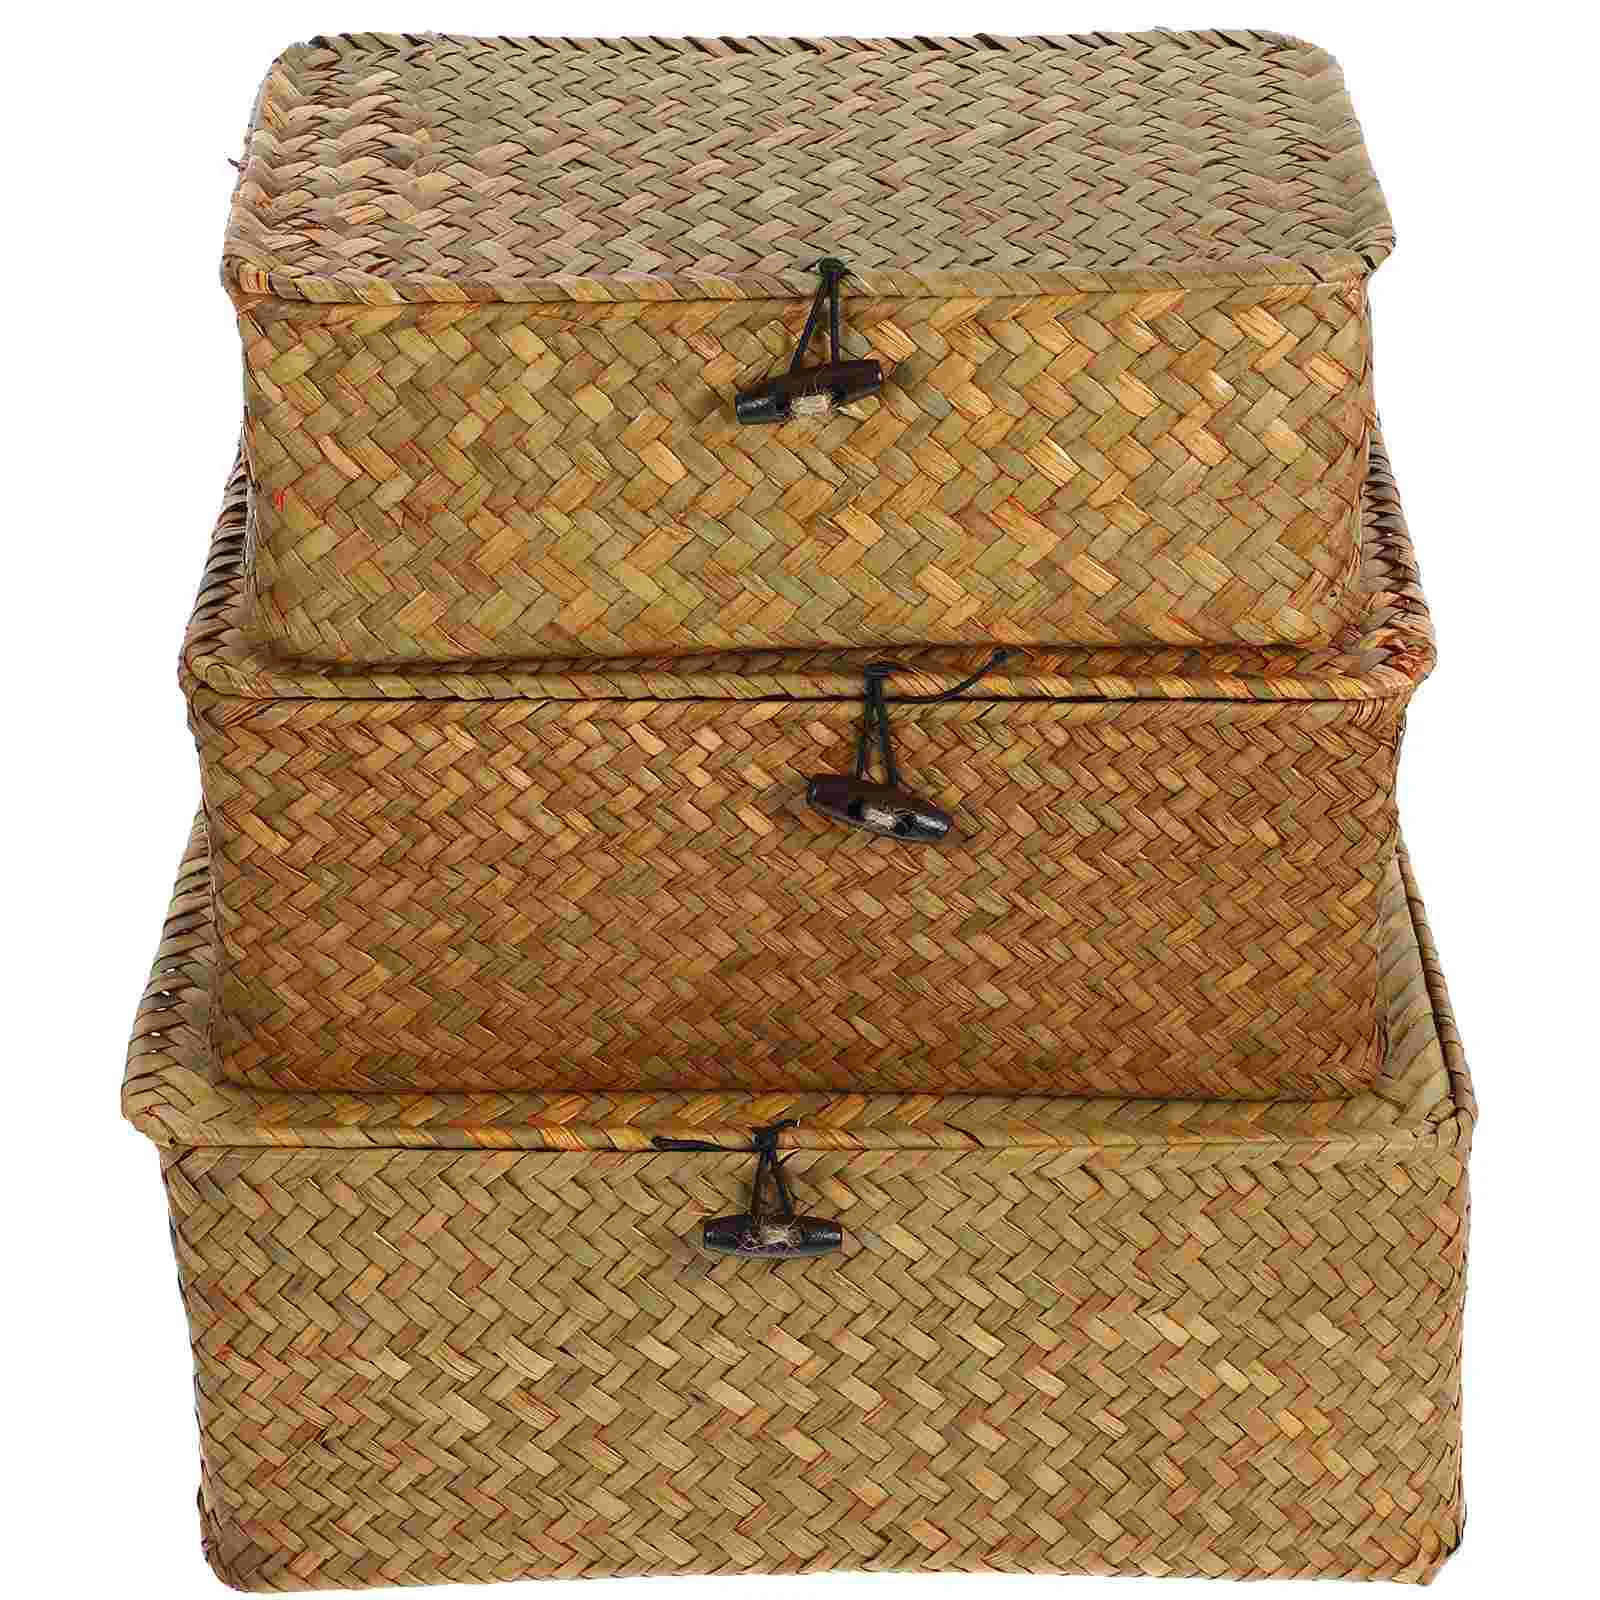 

3Pcs Handwoven Natural Seagrass Nesting Large Storage Bin With Lid Woven Organizer Bins Storage Box With Button and Lid for